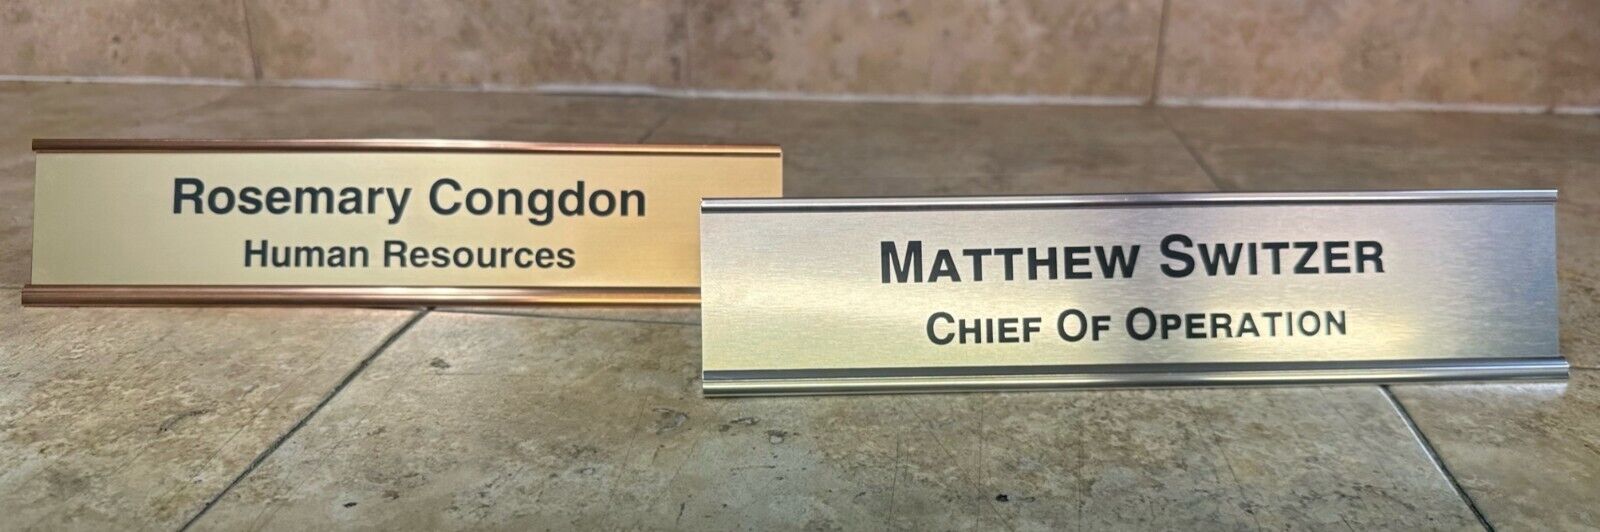 Personalized engraved Desk Name Plate with holder